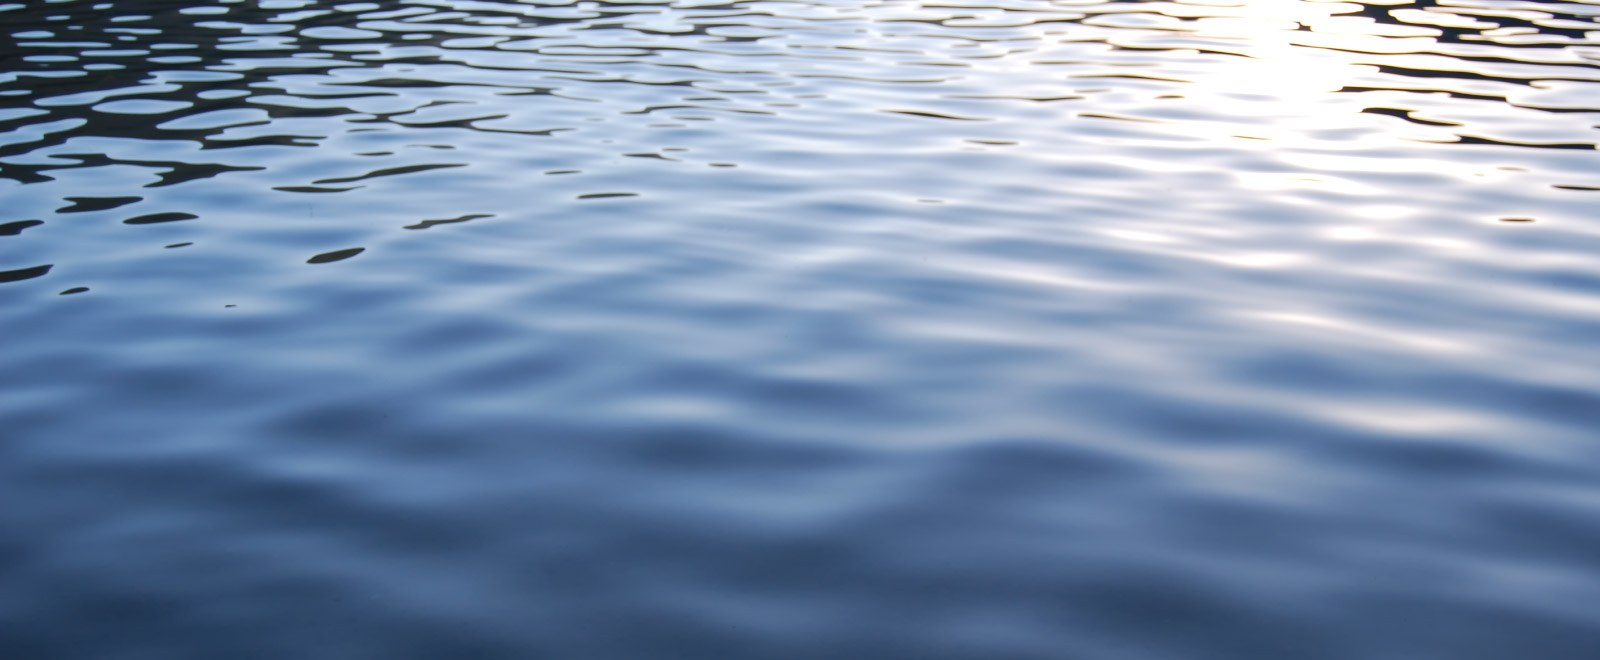 Close up view of water texture